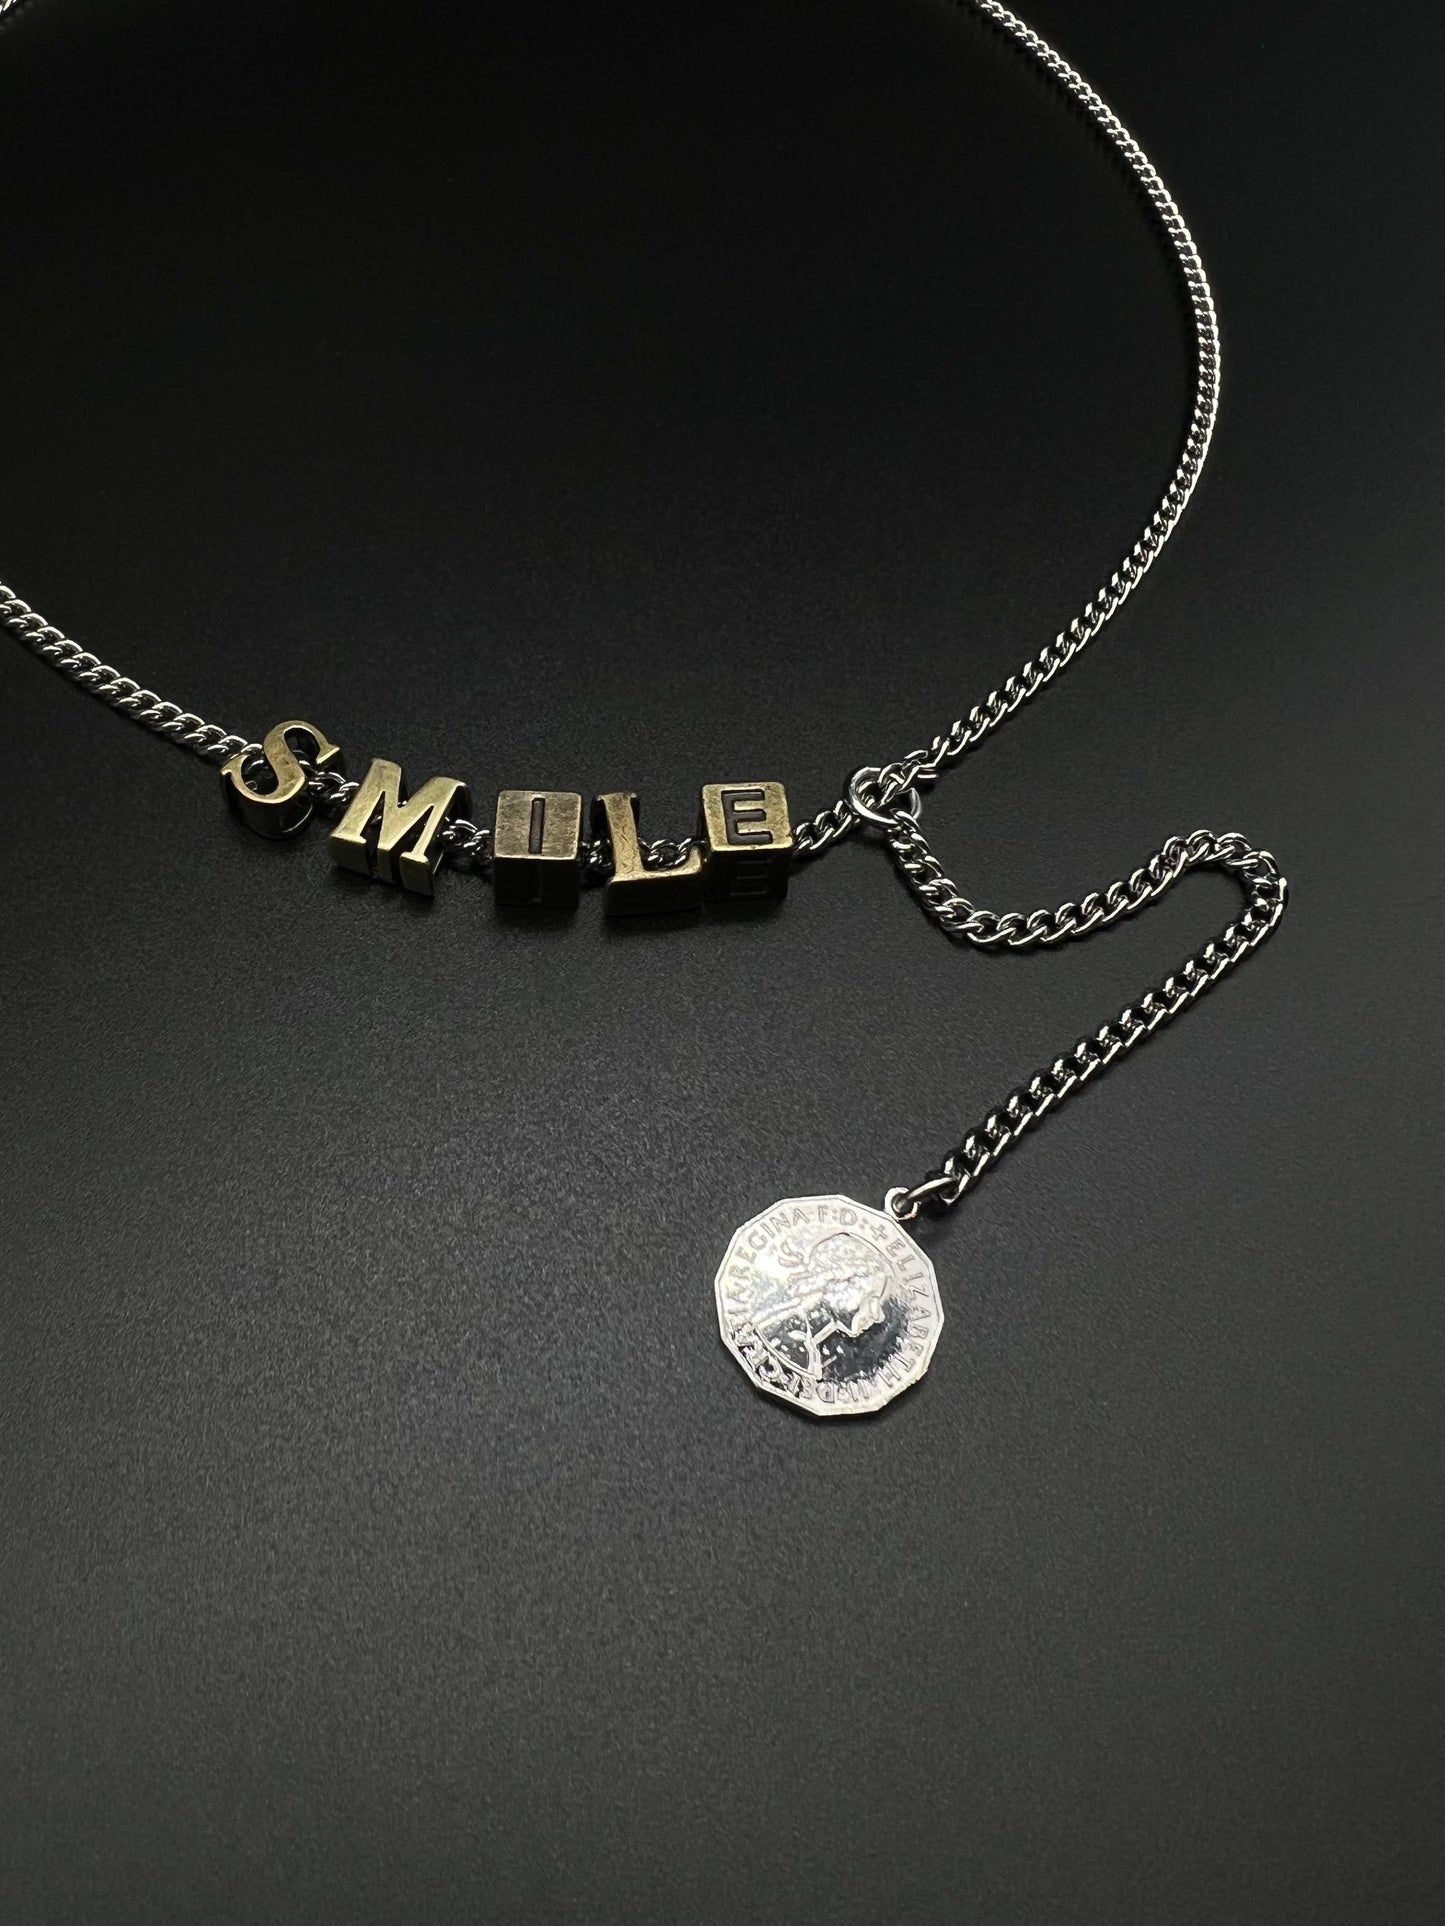 "SMILE" necklace